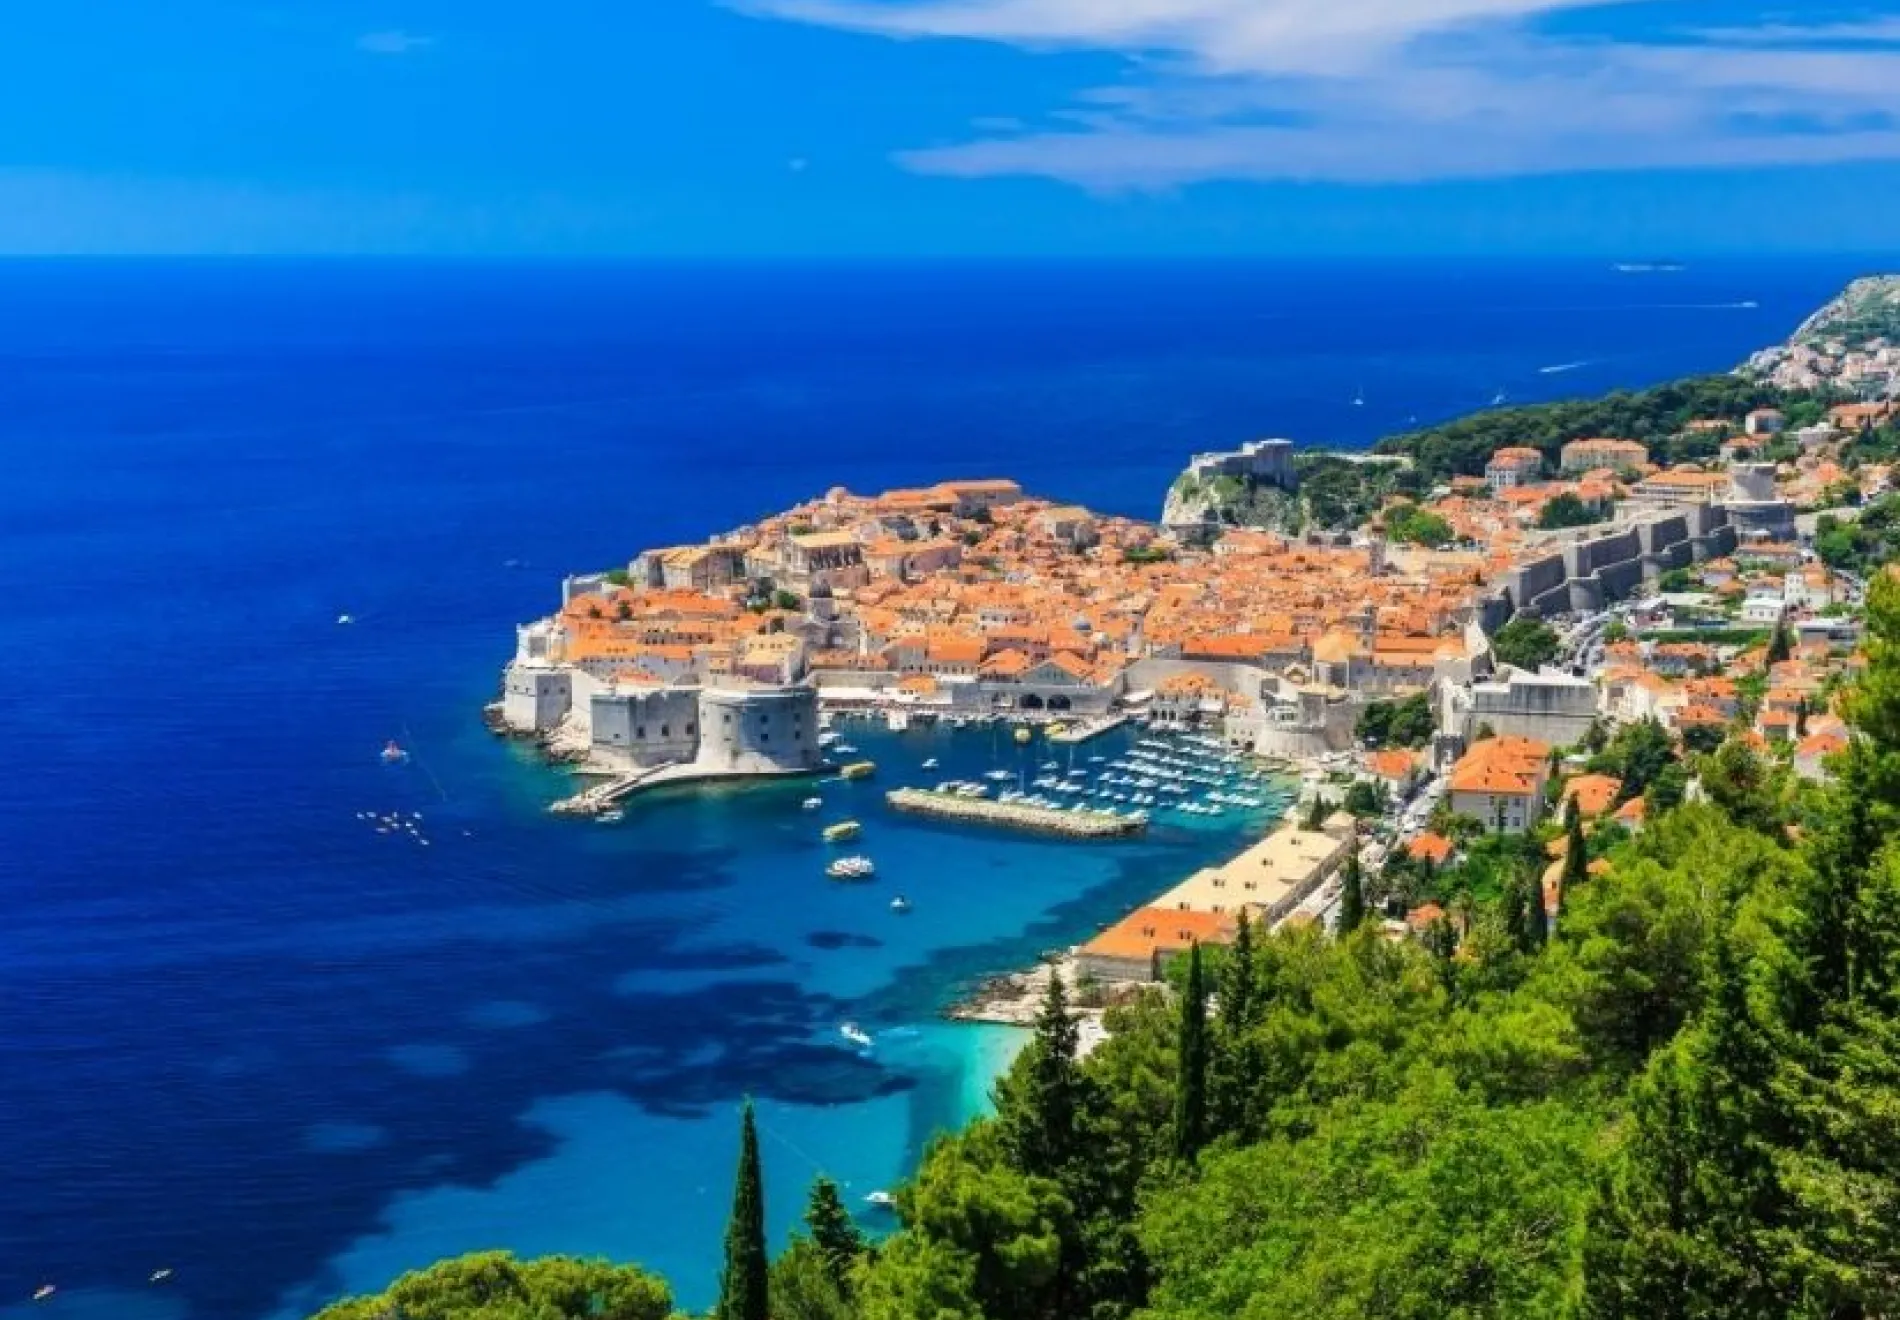 A-panoramic-view-of-the-walled-city-Dubrovnik-Croatia CROP